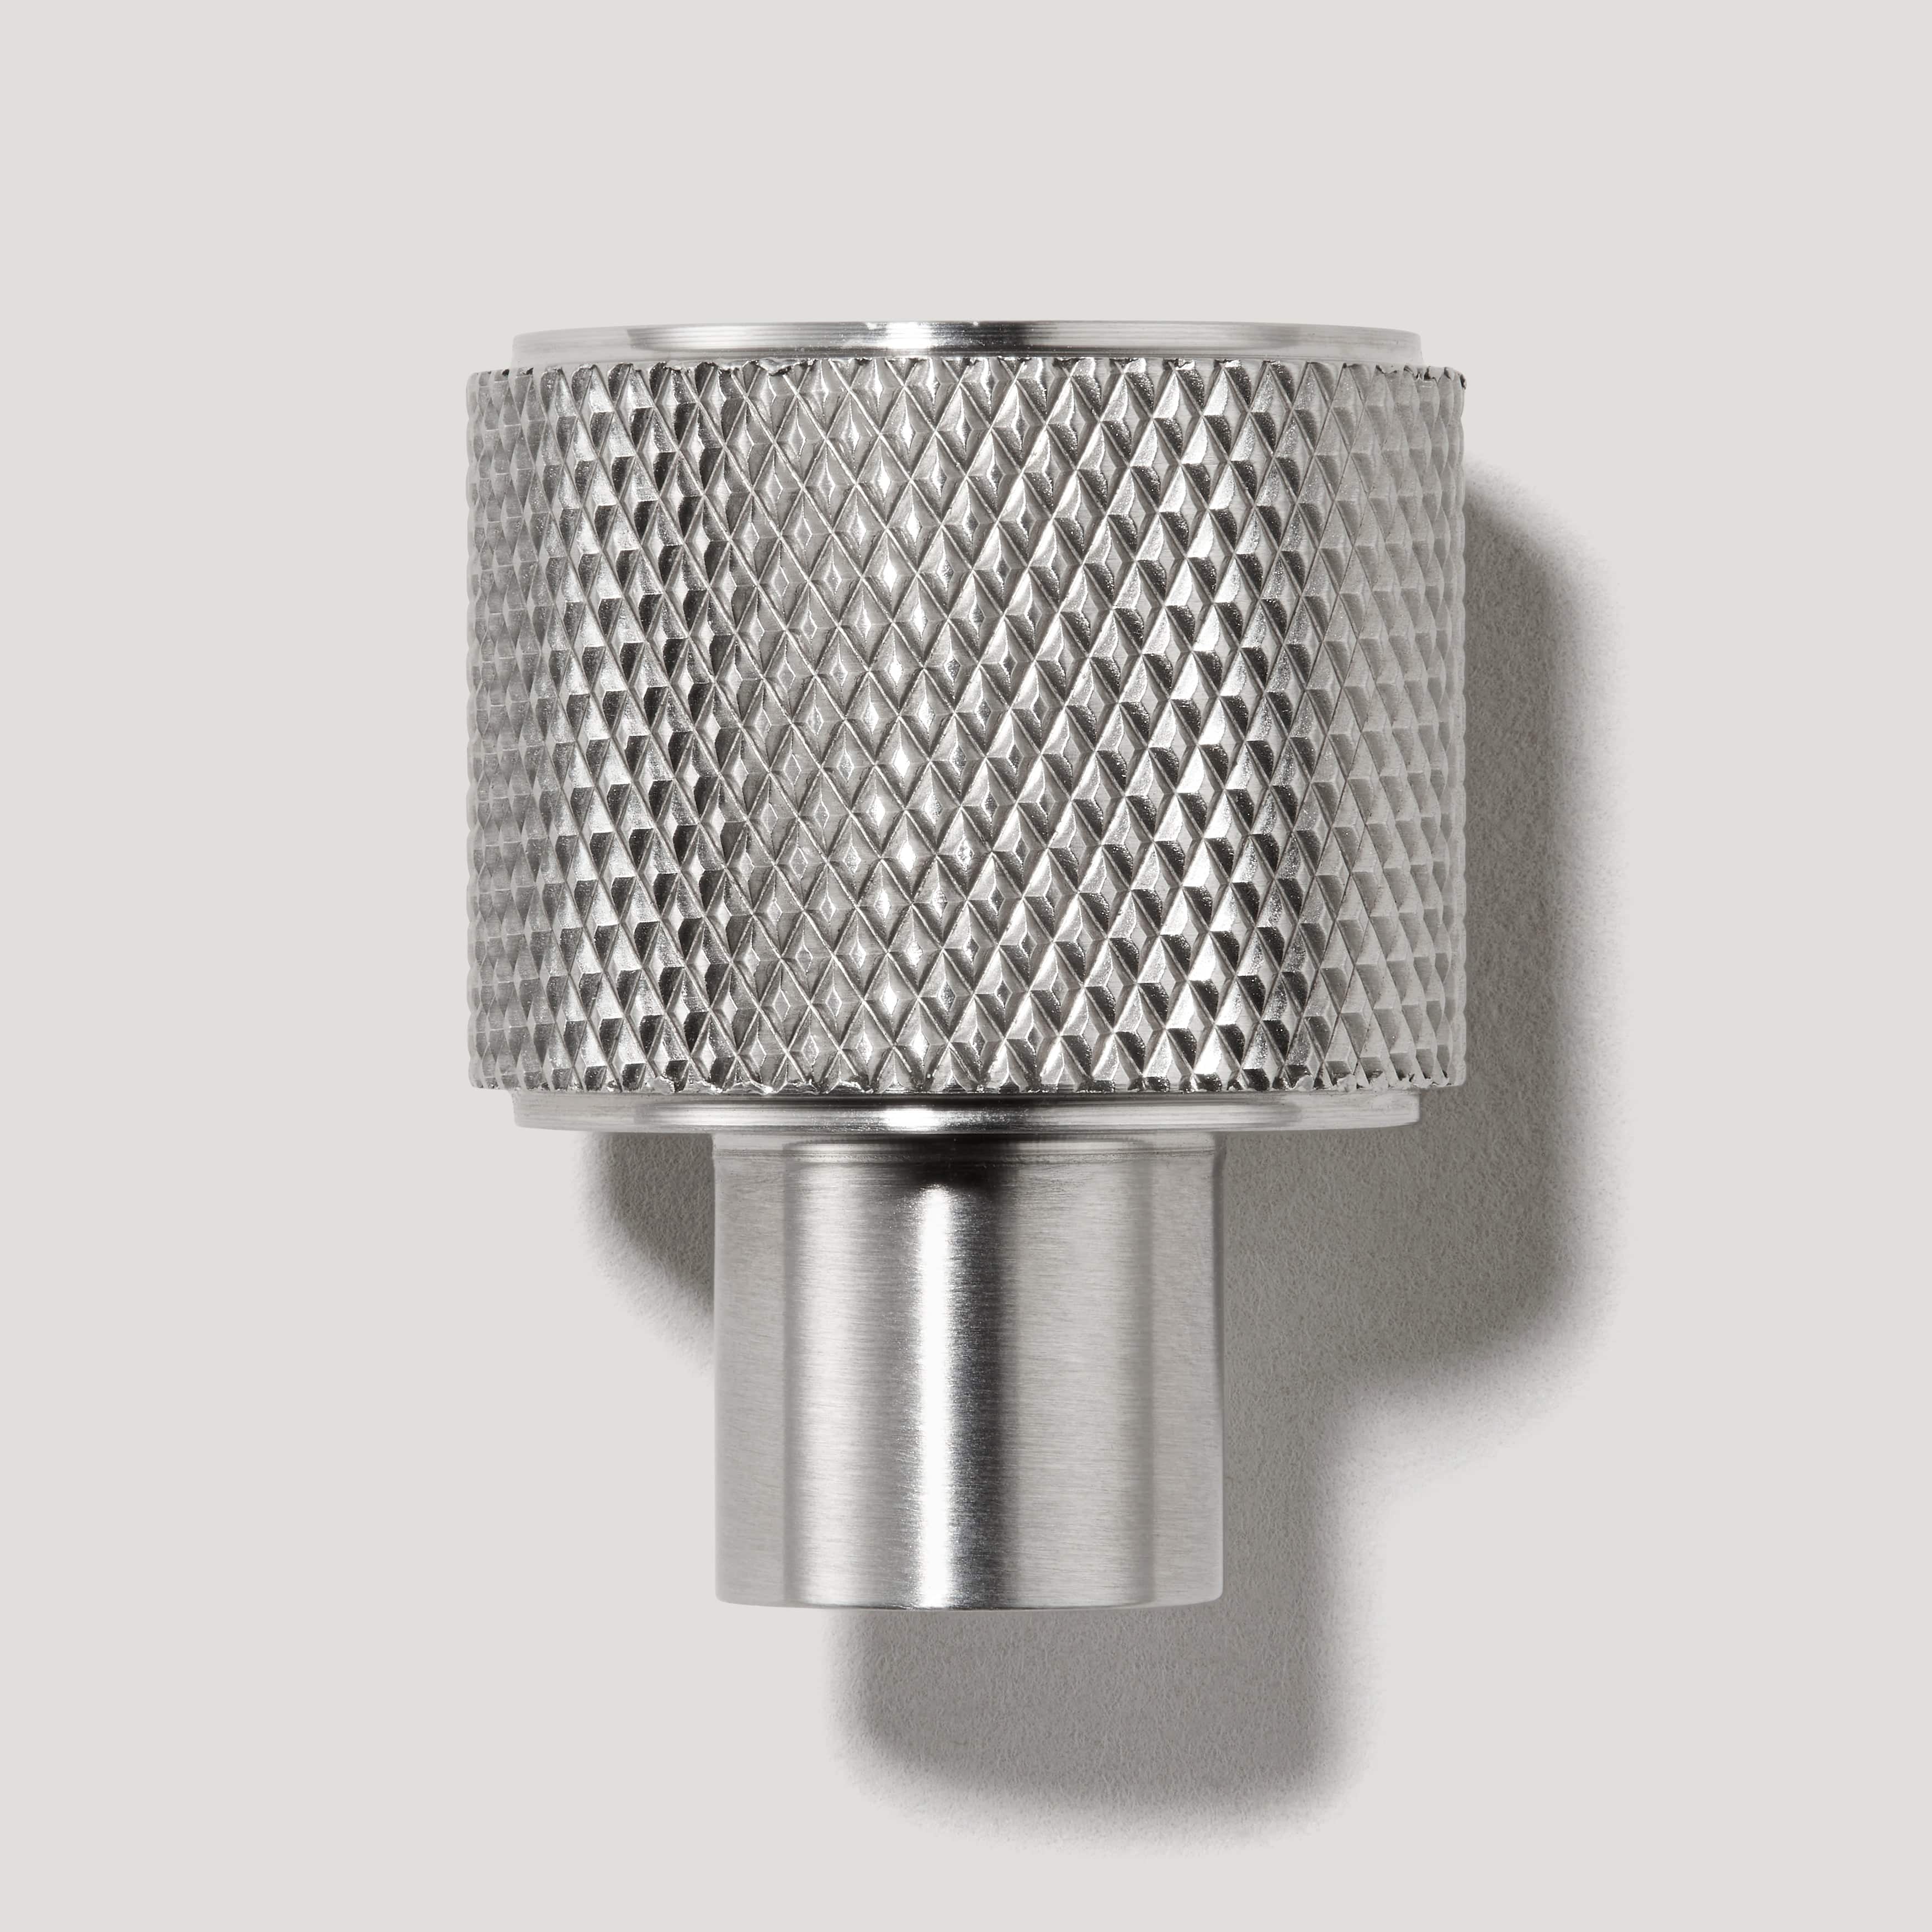 Plank Hardware REVILL Knurled Button Wall Hook - Stainless Steel